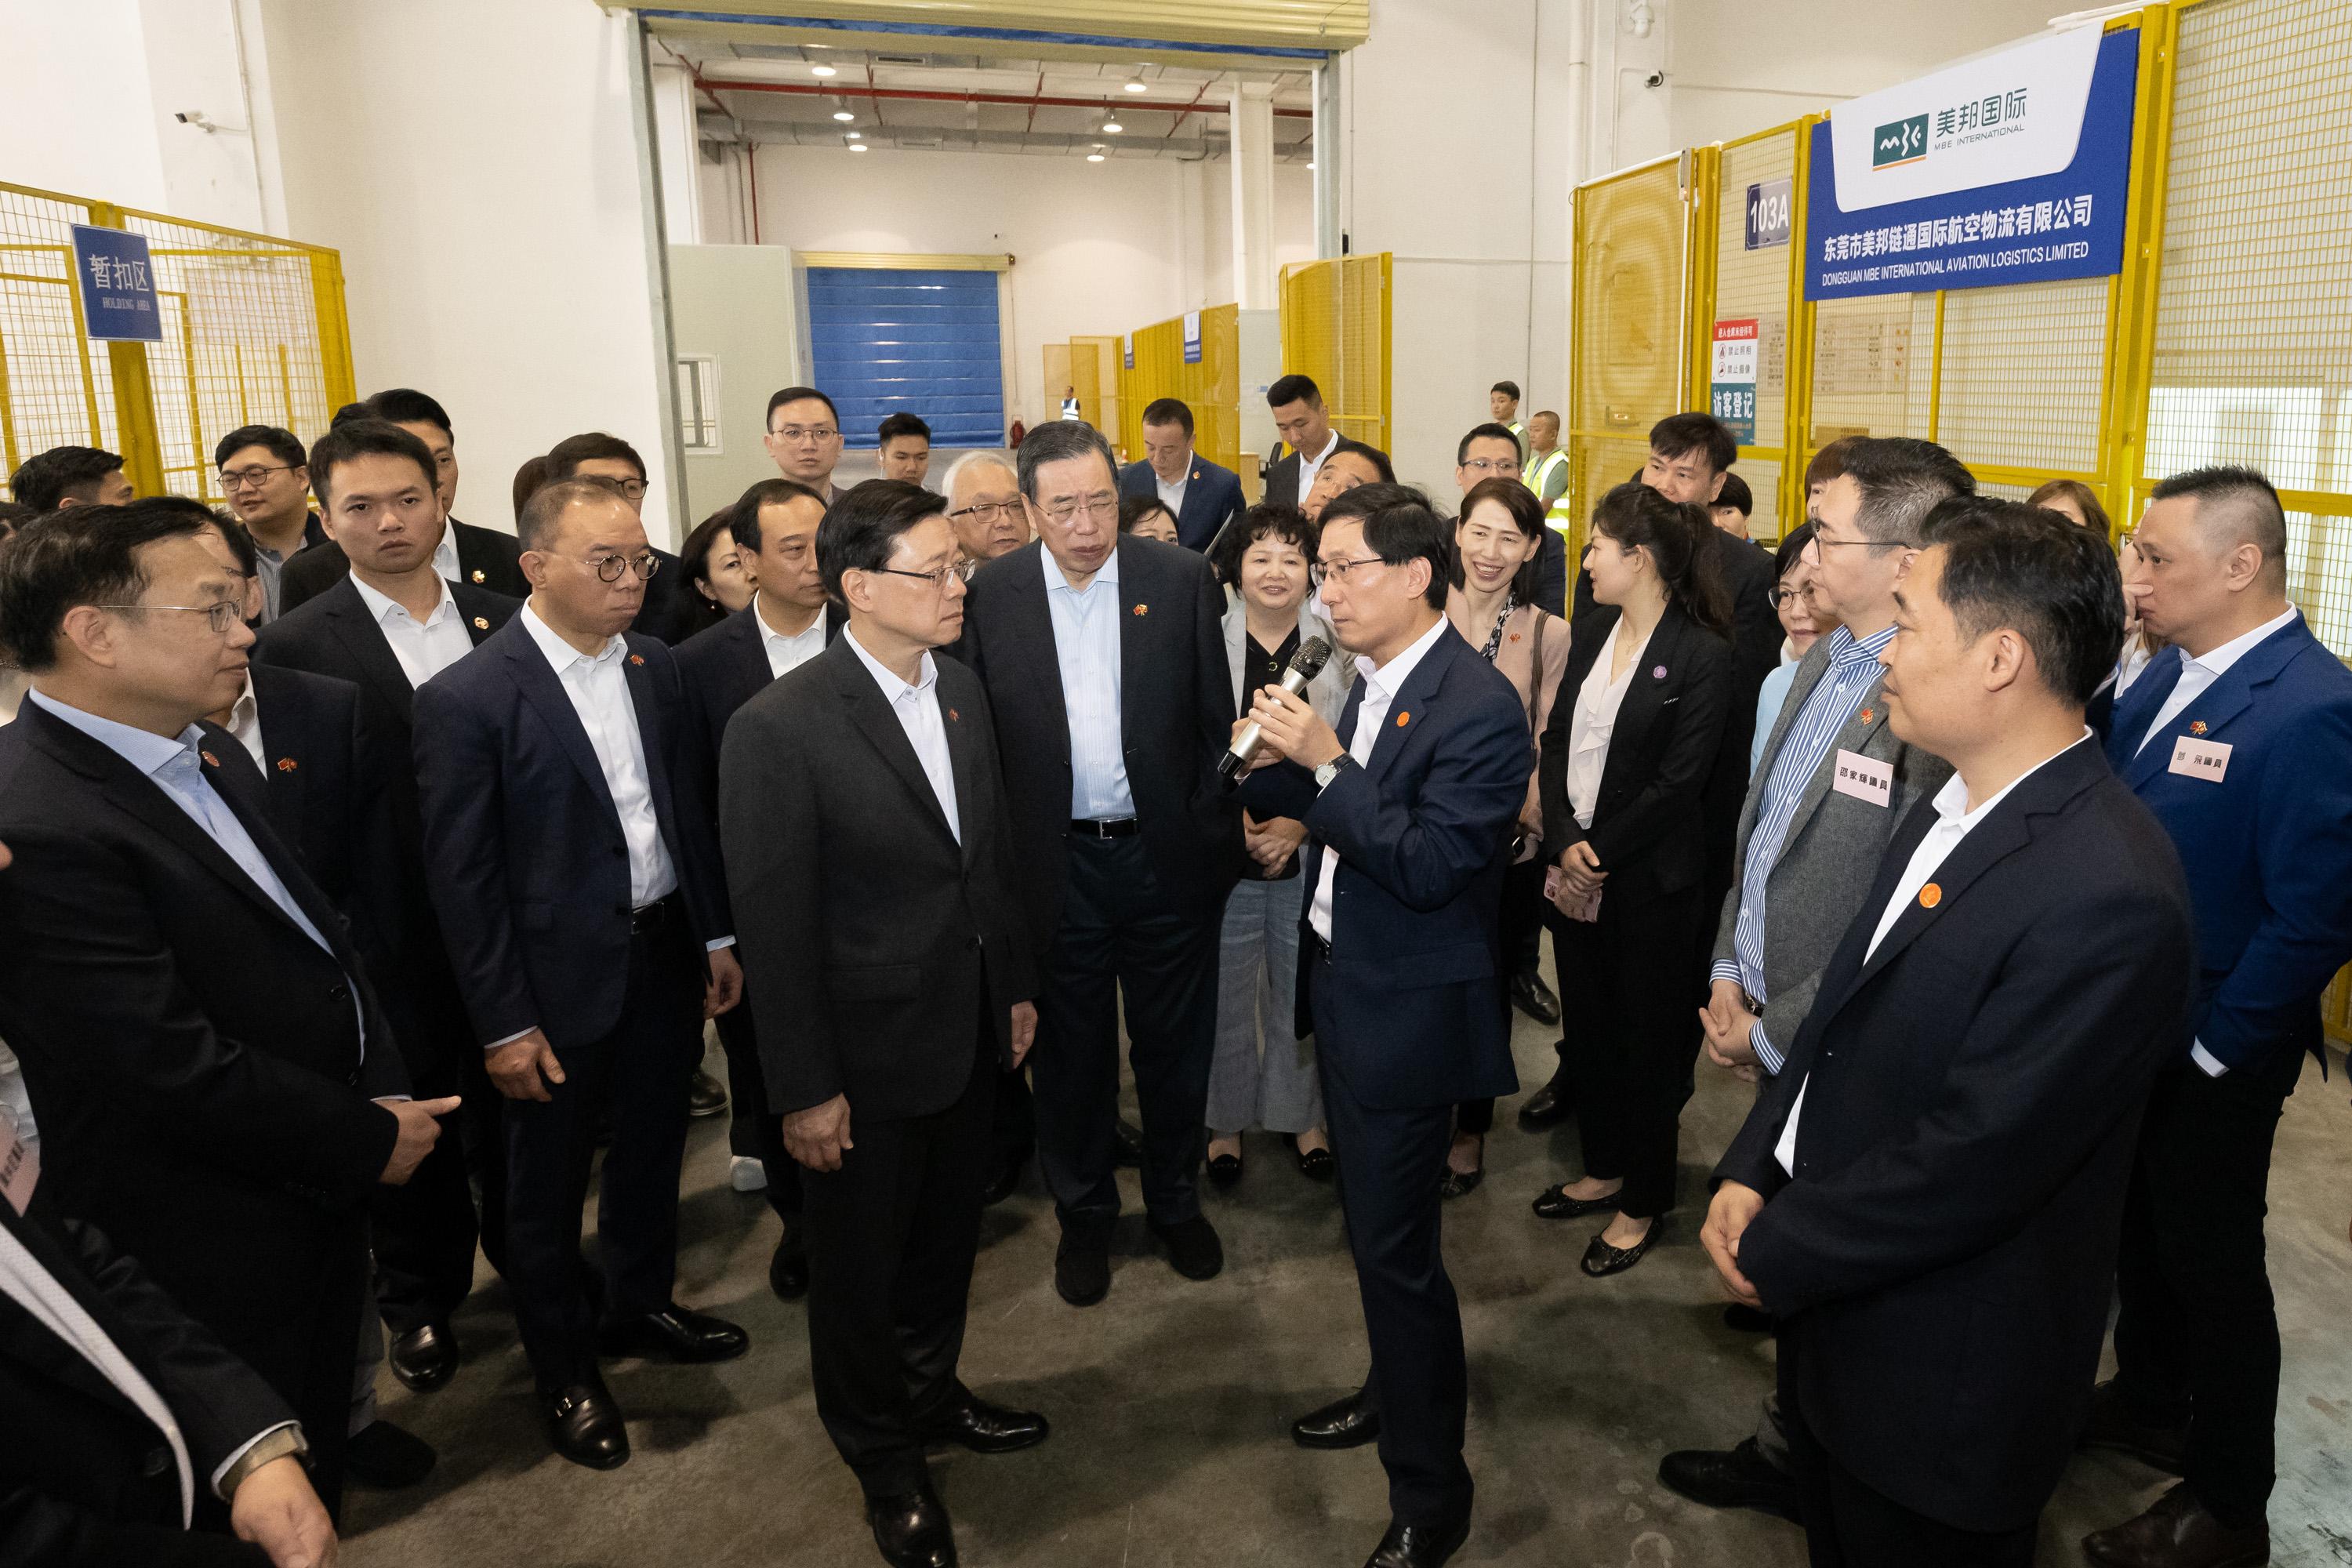 The delegation of the Hong Kong Special Administrative Region Government and the Legislative Council led by the Chief Executive, Mr John Lee, continues its duty visit in the Guangdong-Hong Kong-Macao Greater Bay Area today (April 23). The delegation visited Dongguan Hong Kong International Airport Logistics Park.